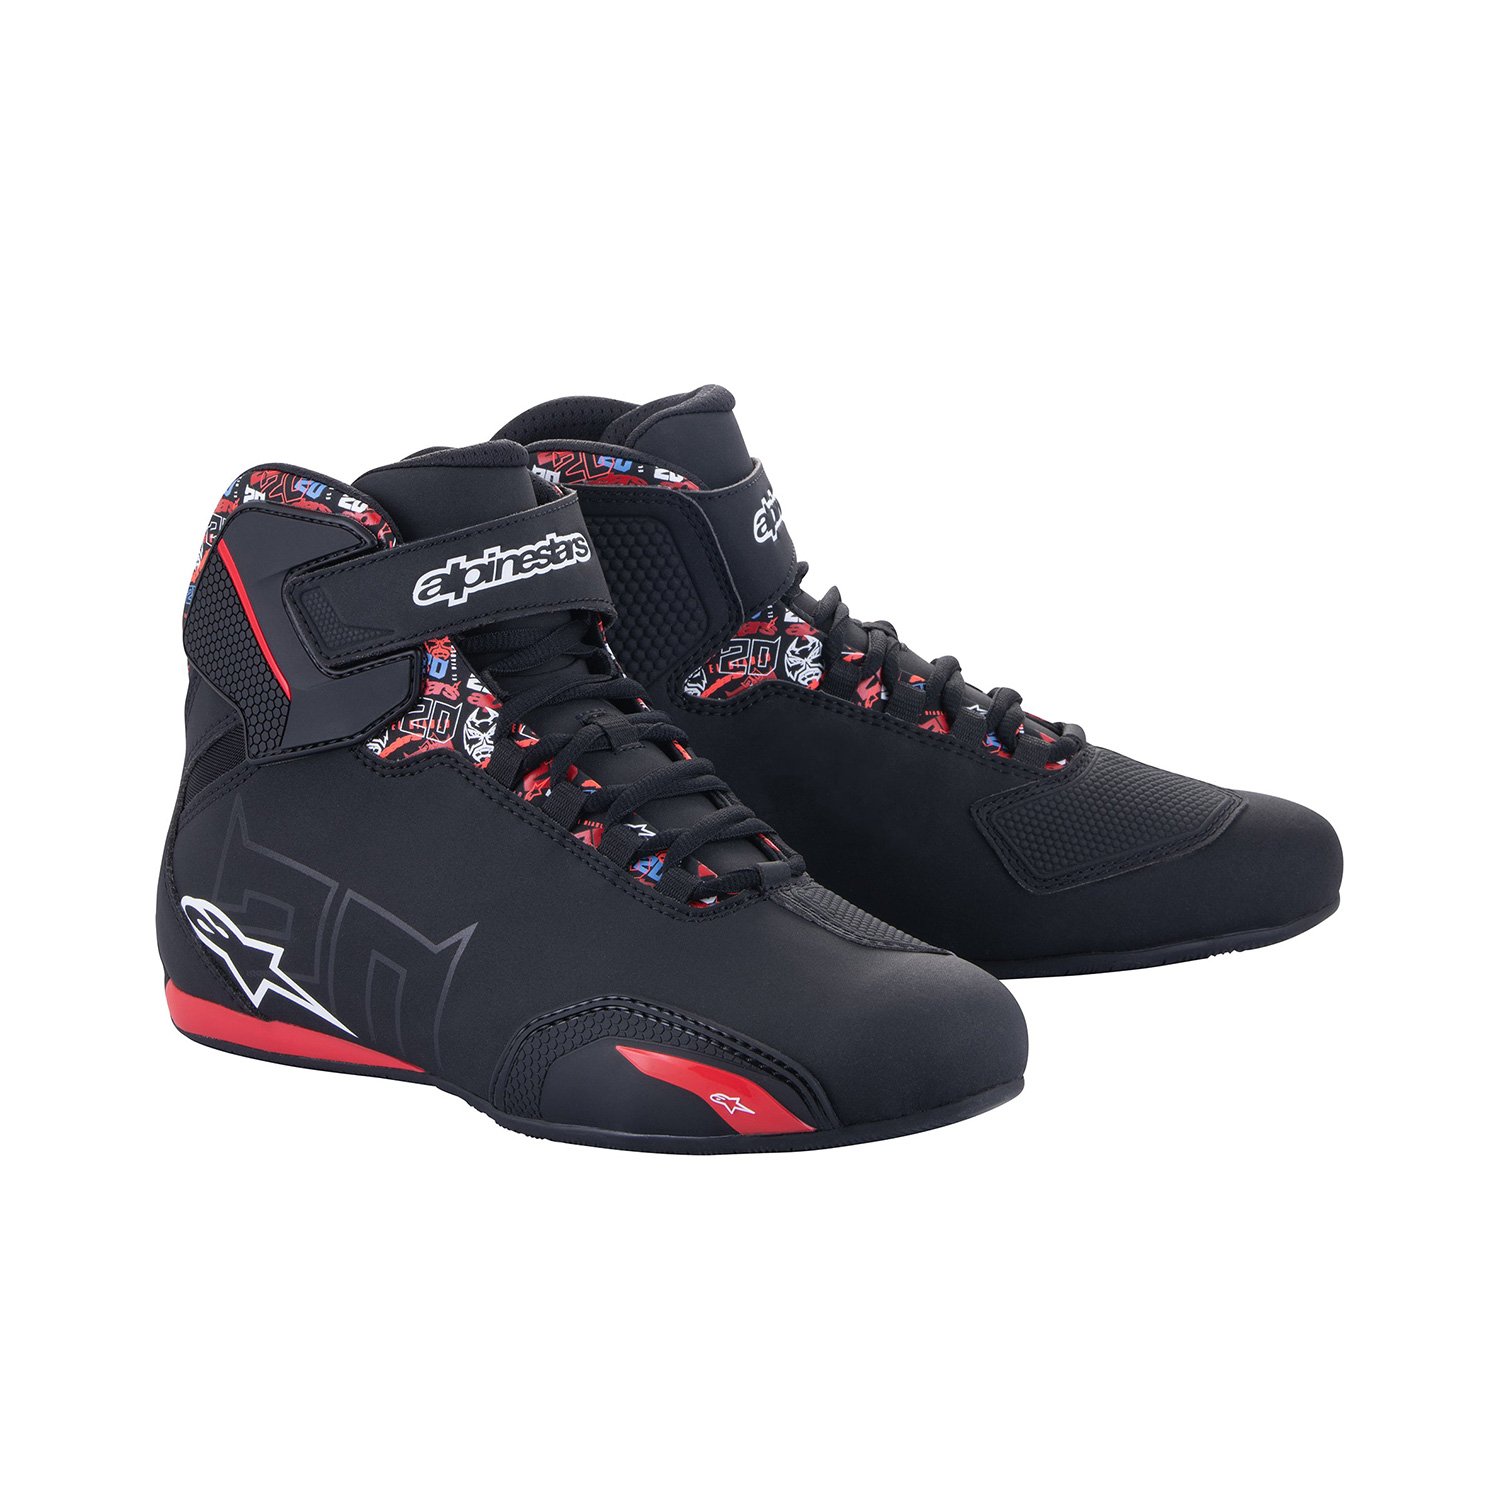 Image of EU Alpinestars FQ20 Sektor Noir Bright Rouge Chaussures Taille US 11